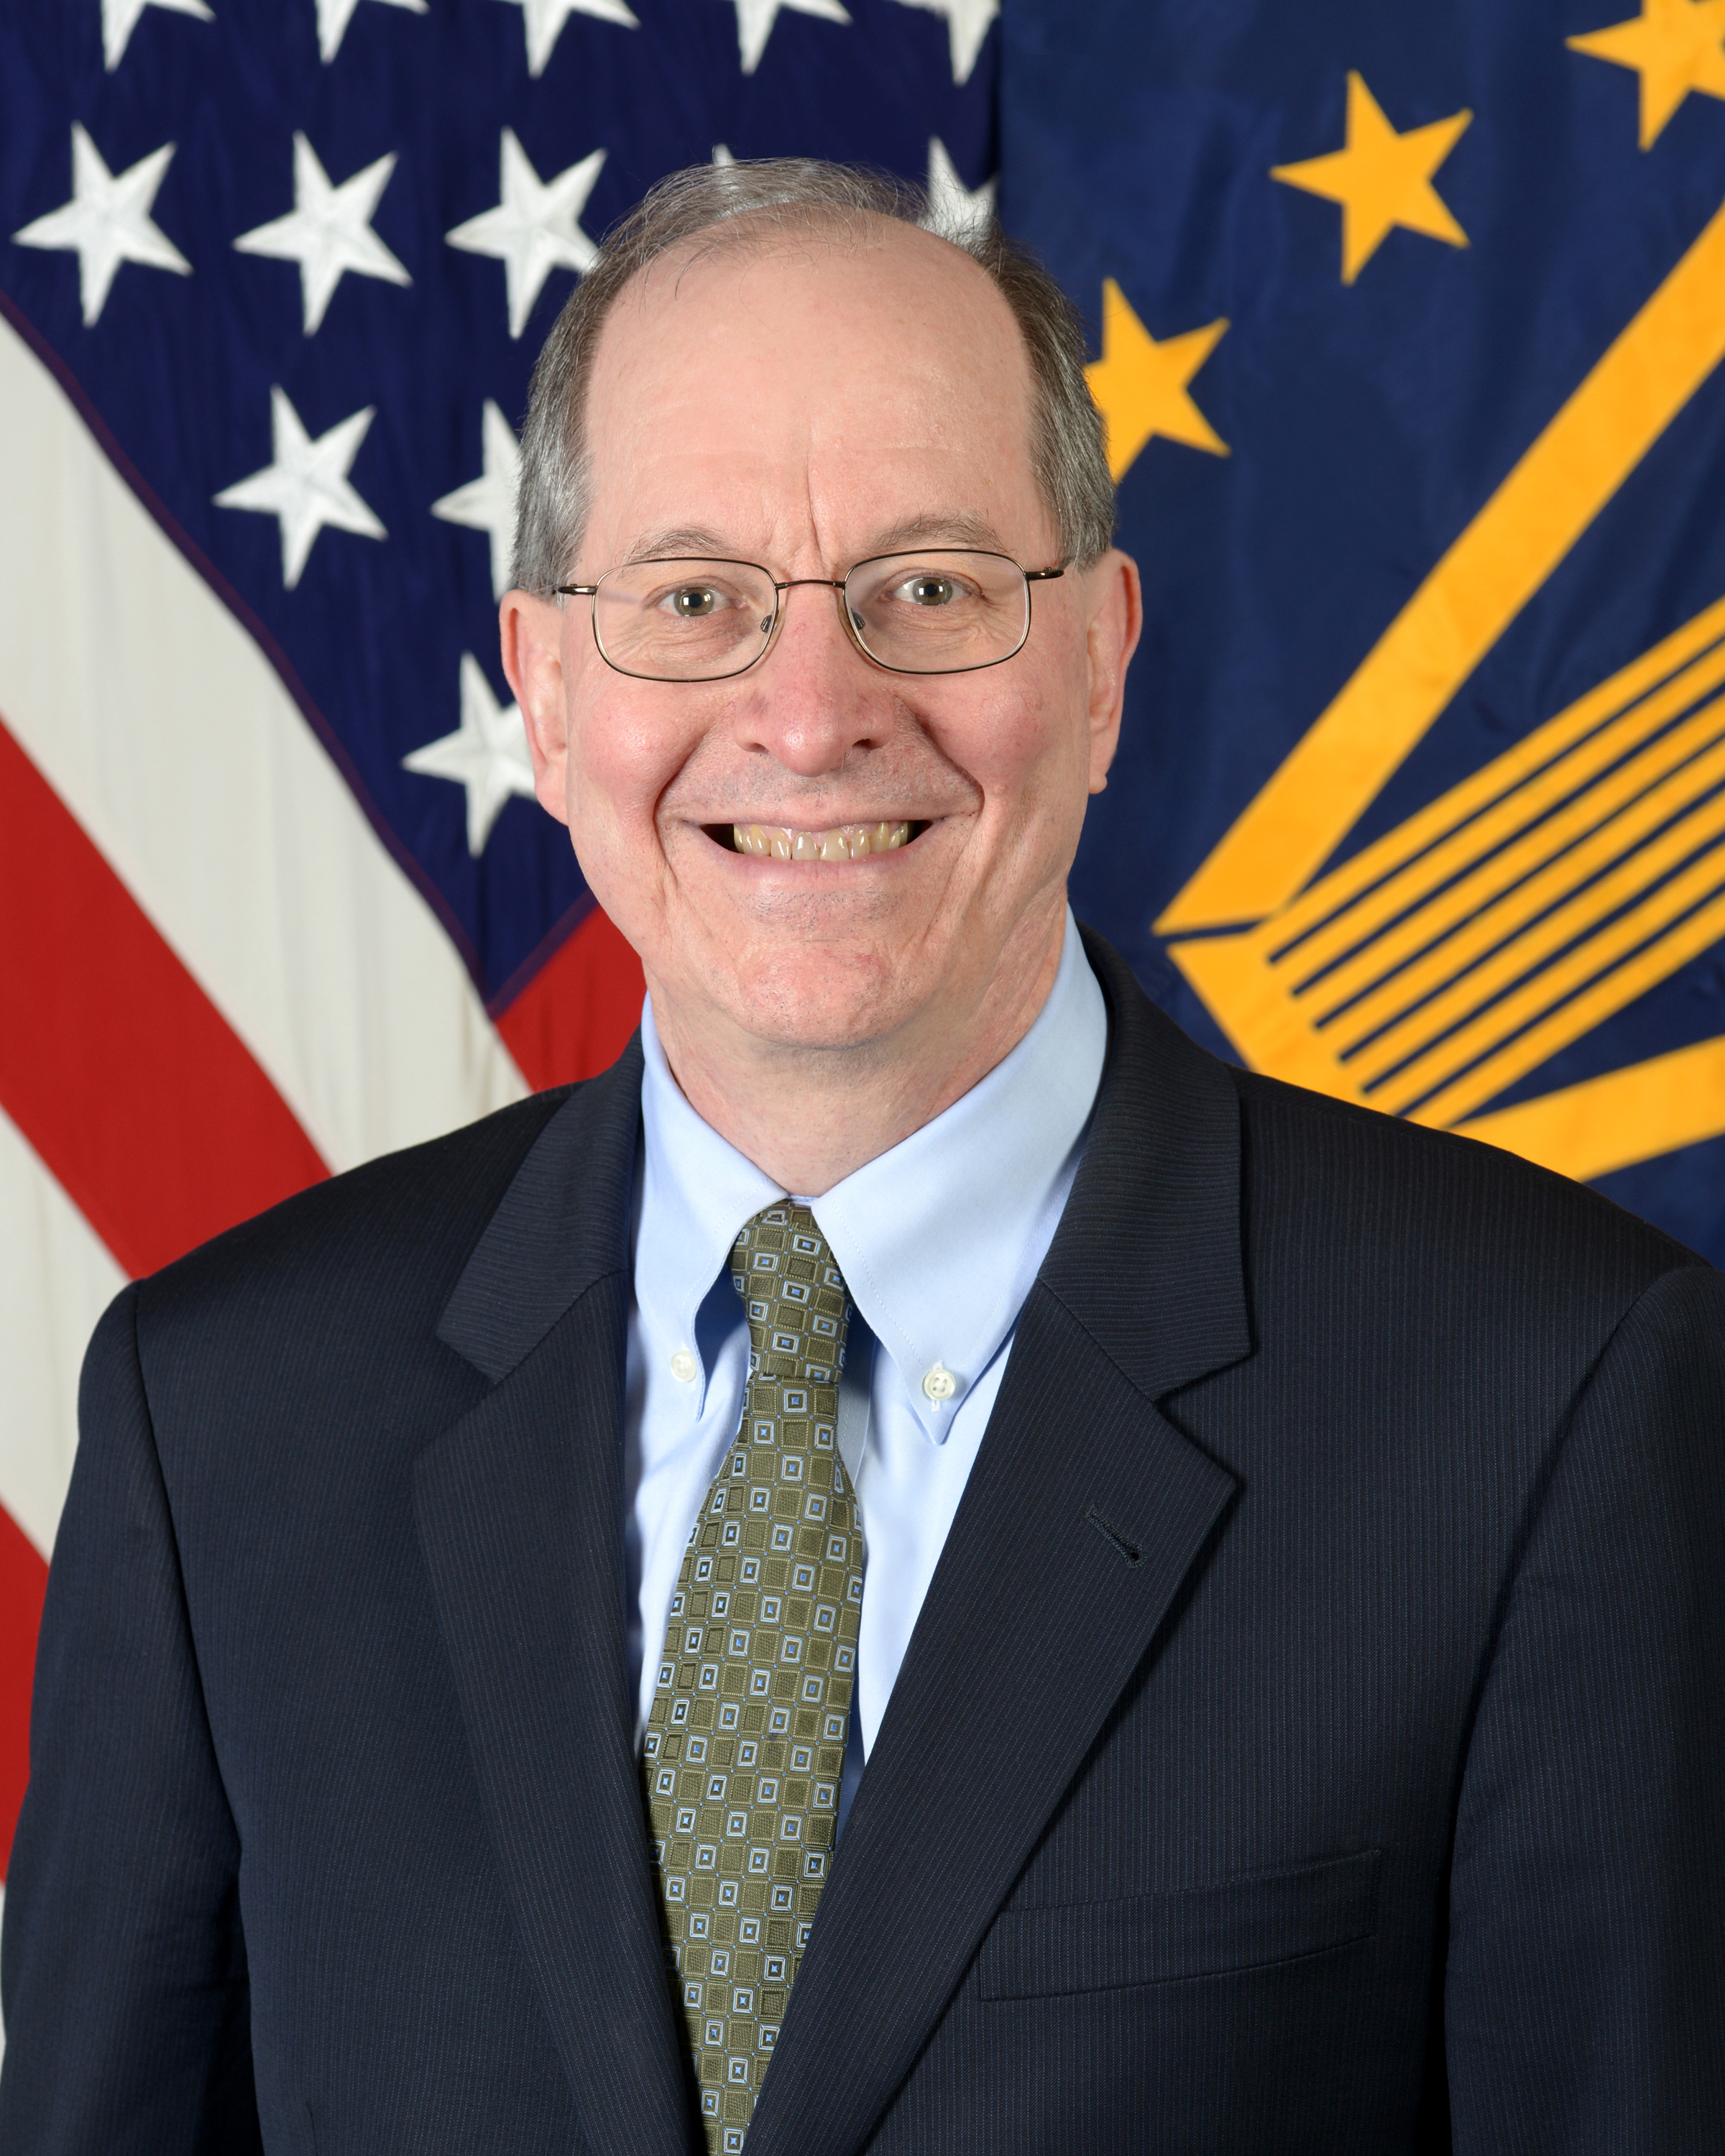 Richard Hale, the deputy chief information officer for Cybersecurity, Office of the Secretary of Defense, poses for his official portrait in the Army portrait studio of the Pentagon in Washington Jan. 8, 2014 140108-A-SS368-006